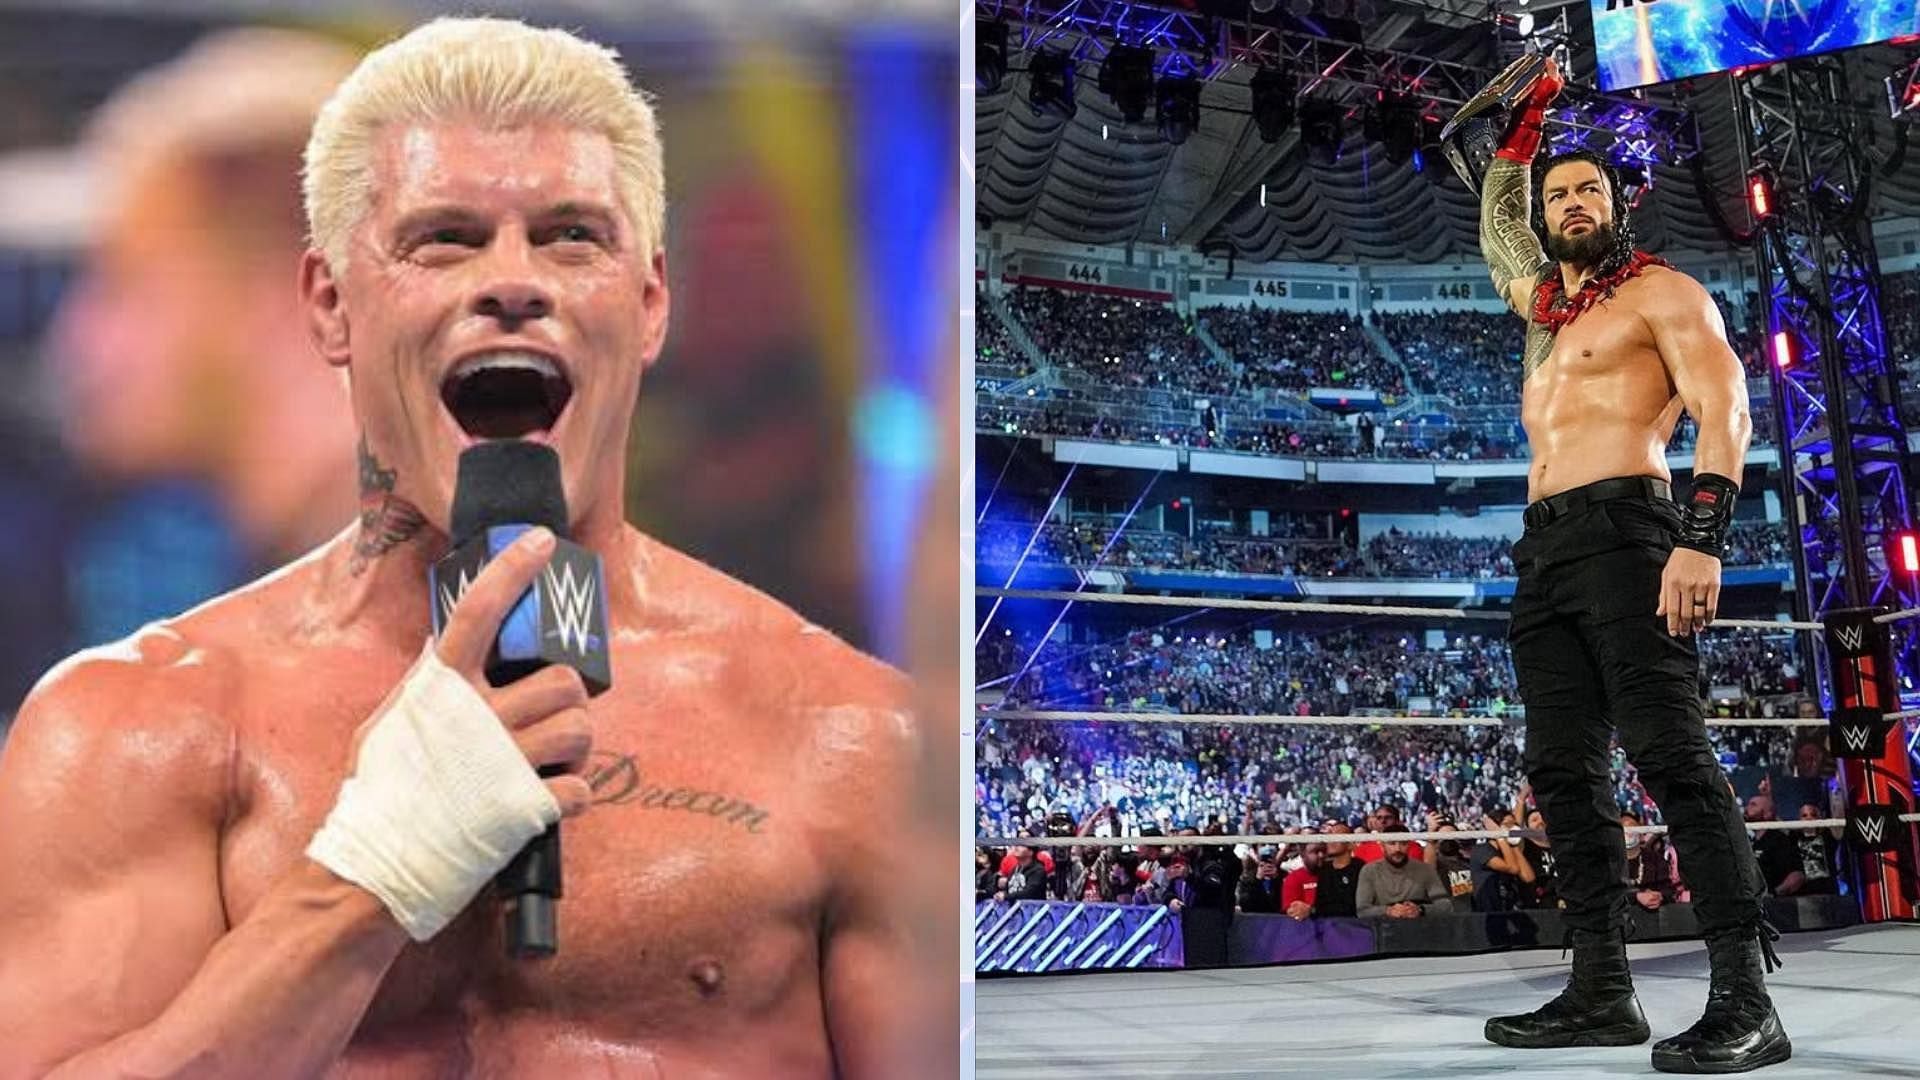 Roman Reigns and Cody Rhodes will face each other one-on-one this Friday on SmackDown